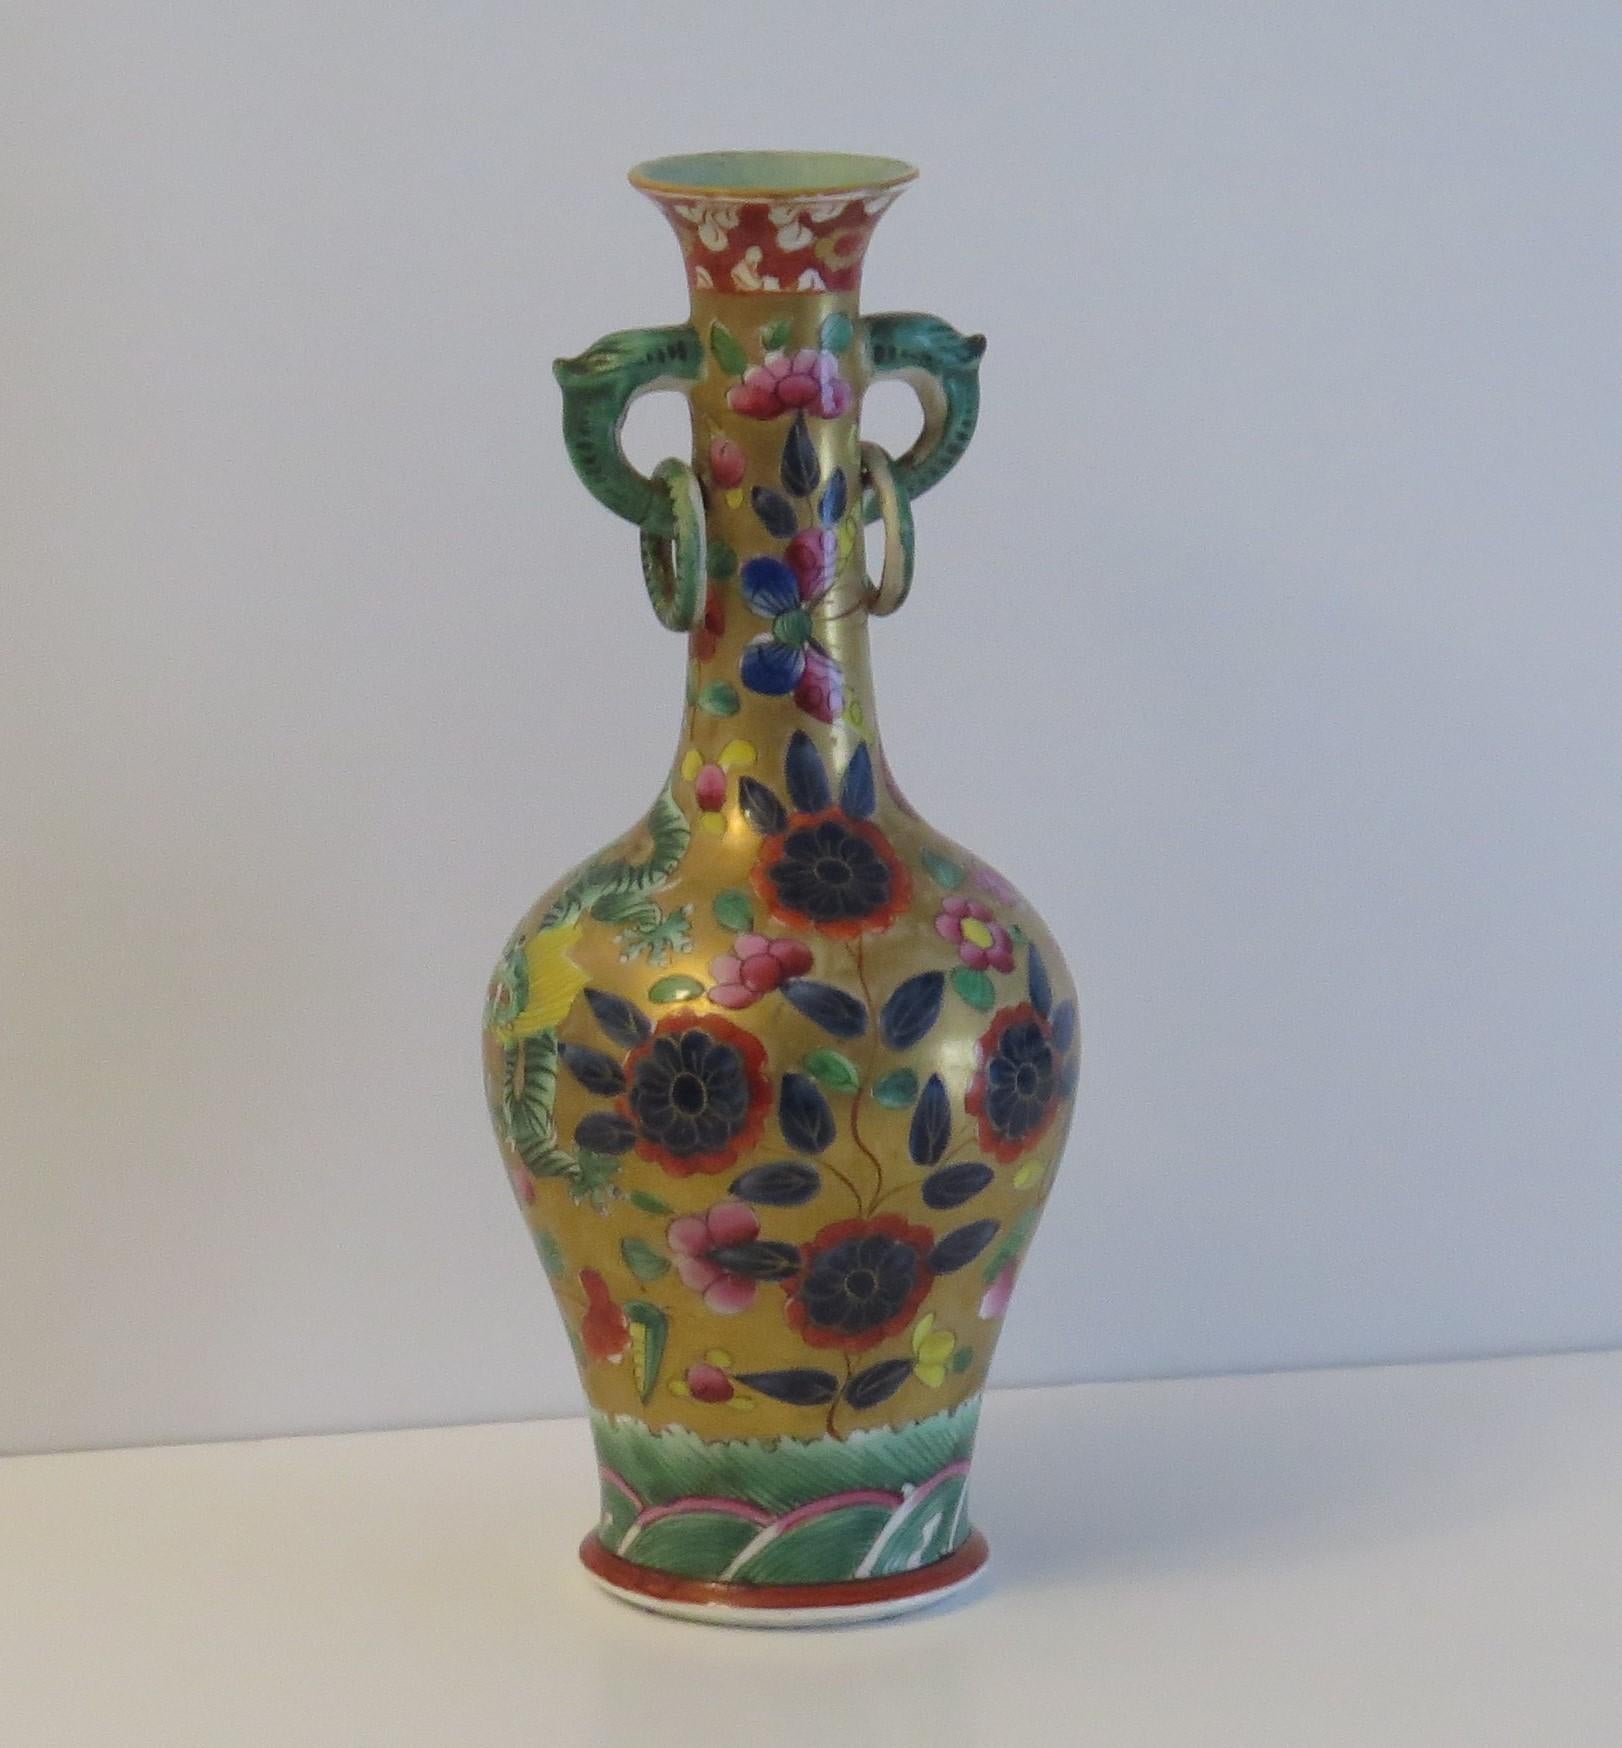 This is a very rare ironstone vase, in the Chinese style, all hand painted in the coloured dragon pattern, made by the Mason's factory in the early 19th century.

Both the vase shape and the pattern are very rare.

The vase has a bottle shape with a